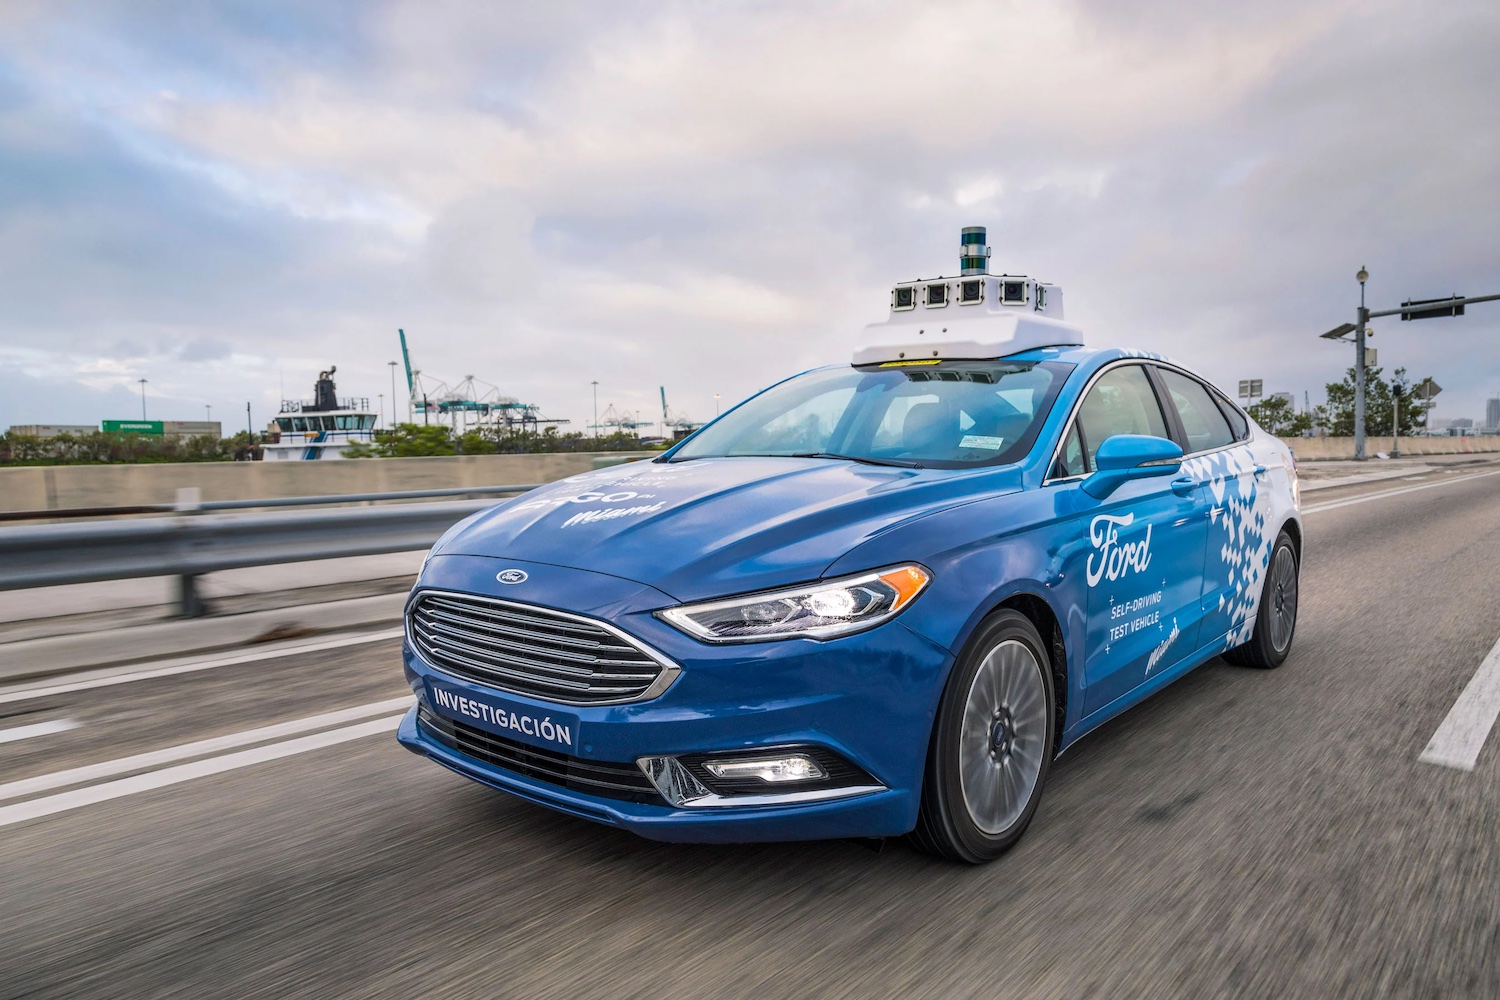 Ford Wants To Make Self-Driving Cars That Will Repossess Themselves Without Drivers